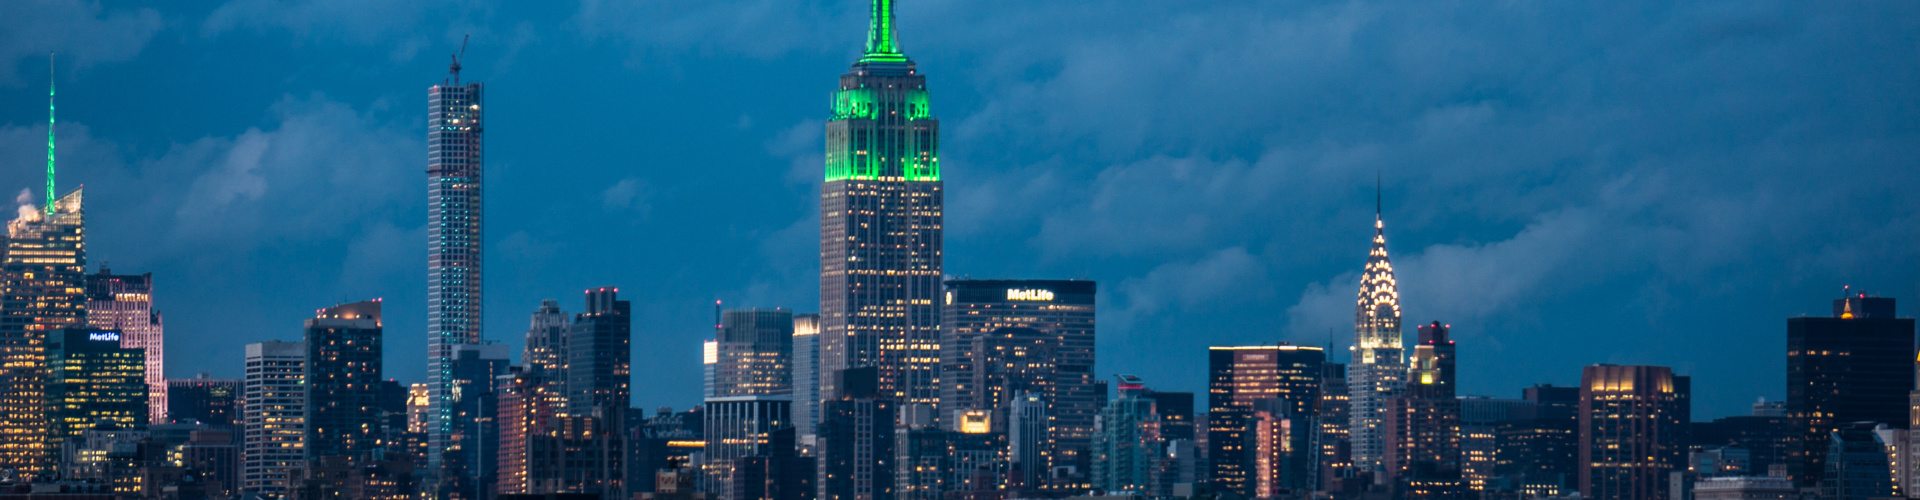 Focal Point: 10 Pictures of the Empire State Building